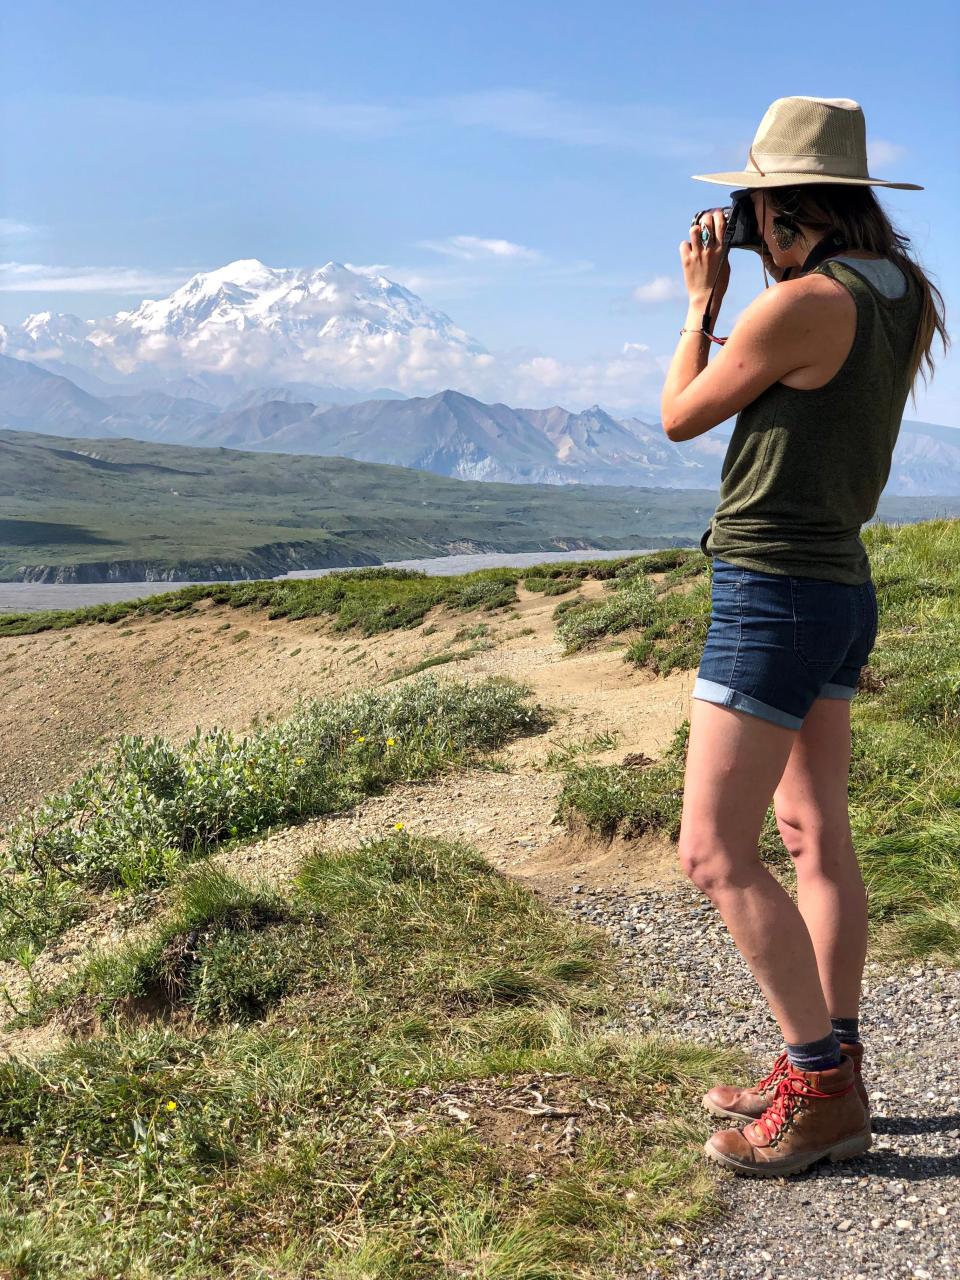 Emily, wearing a hat, a green tank top, shorts, and hiking boots, takes a photo with grass and mountains in the background. 